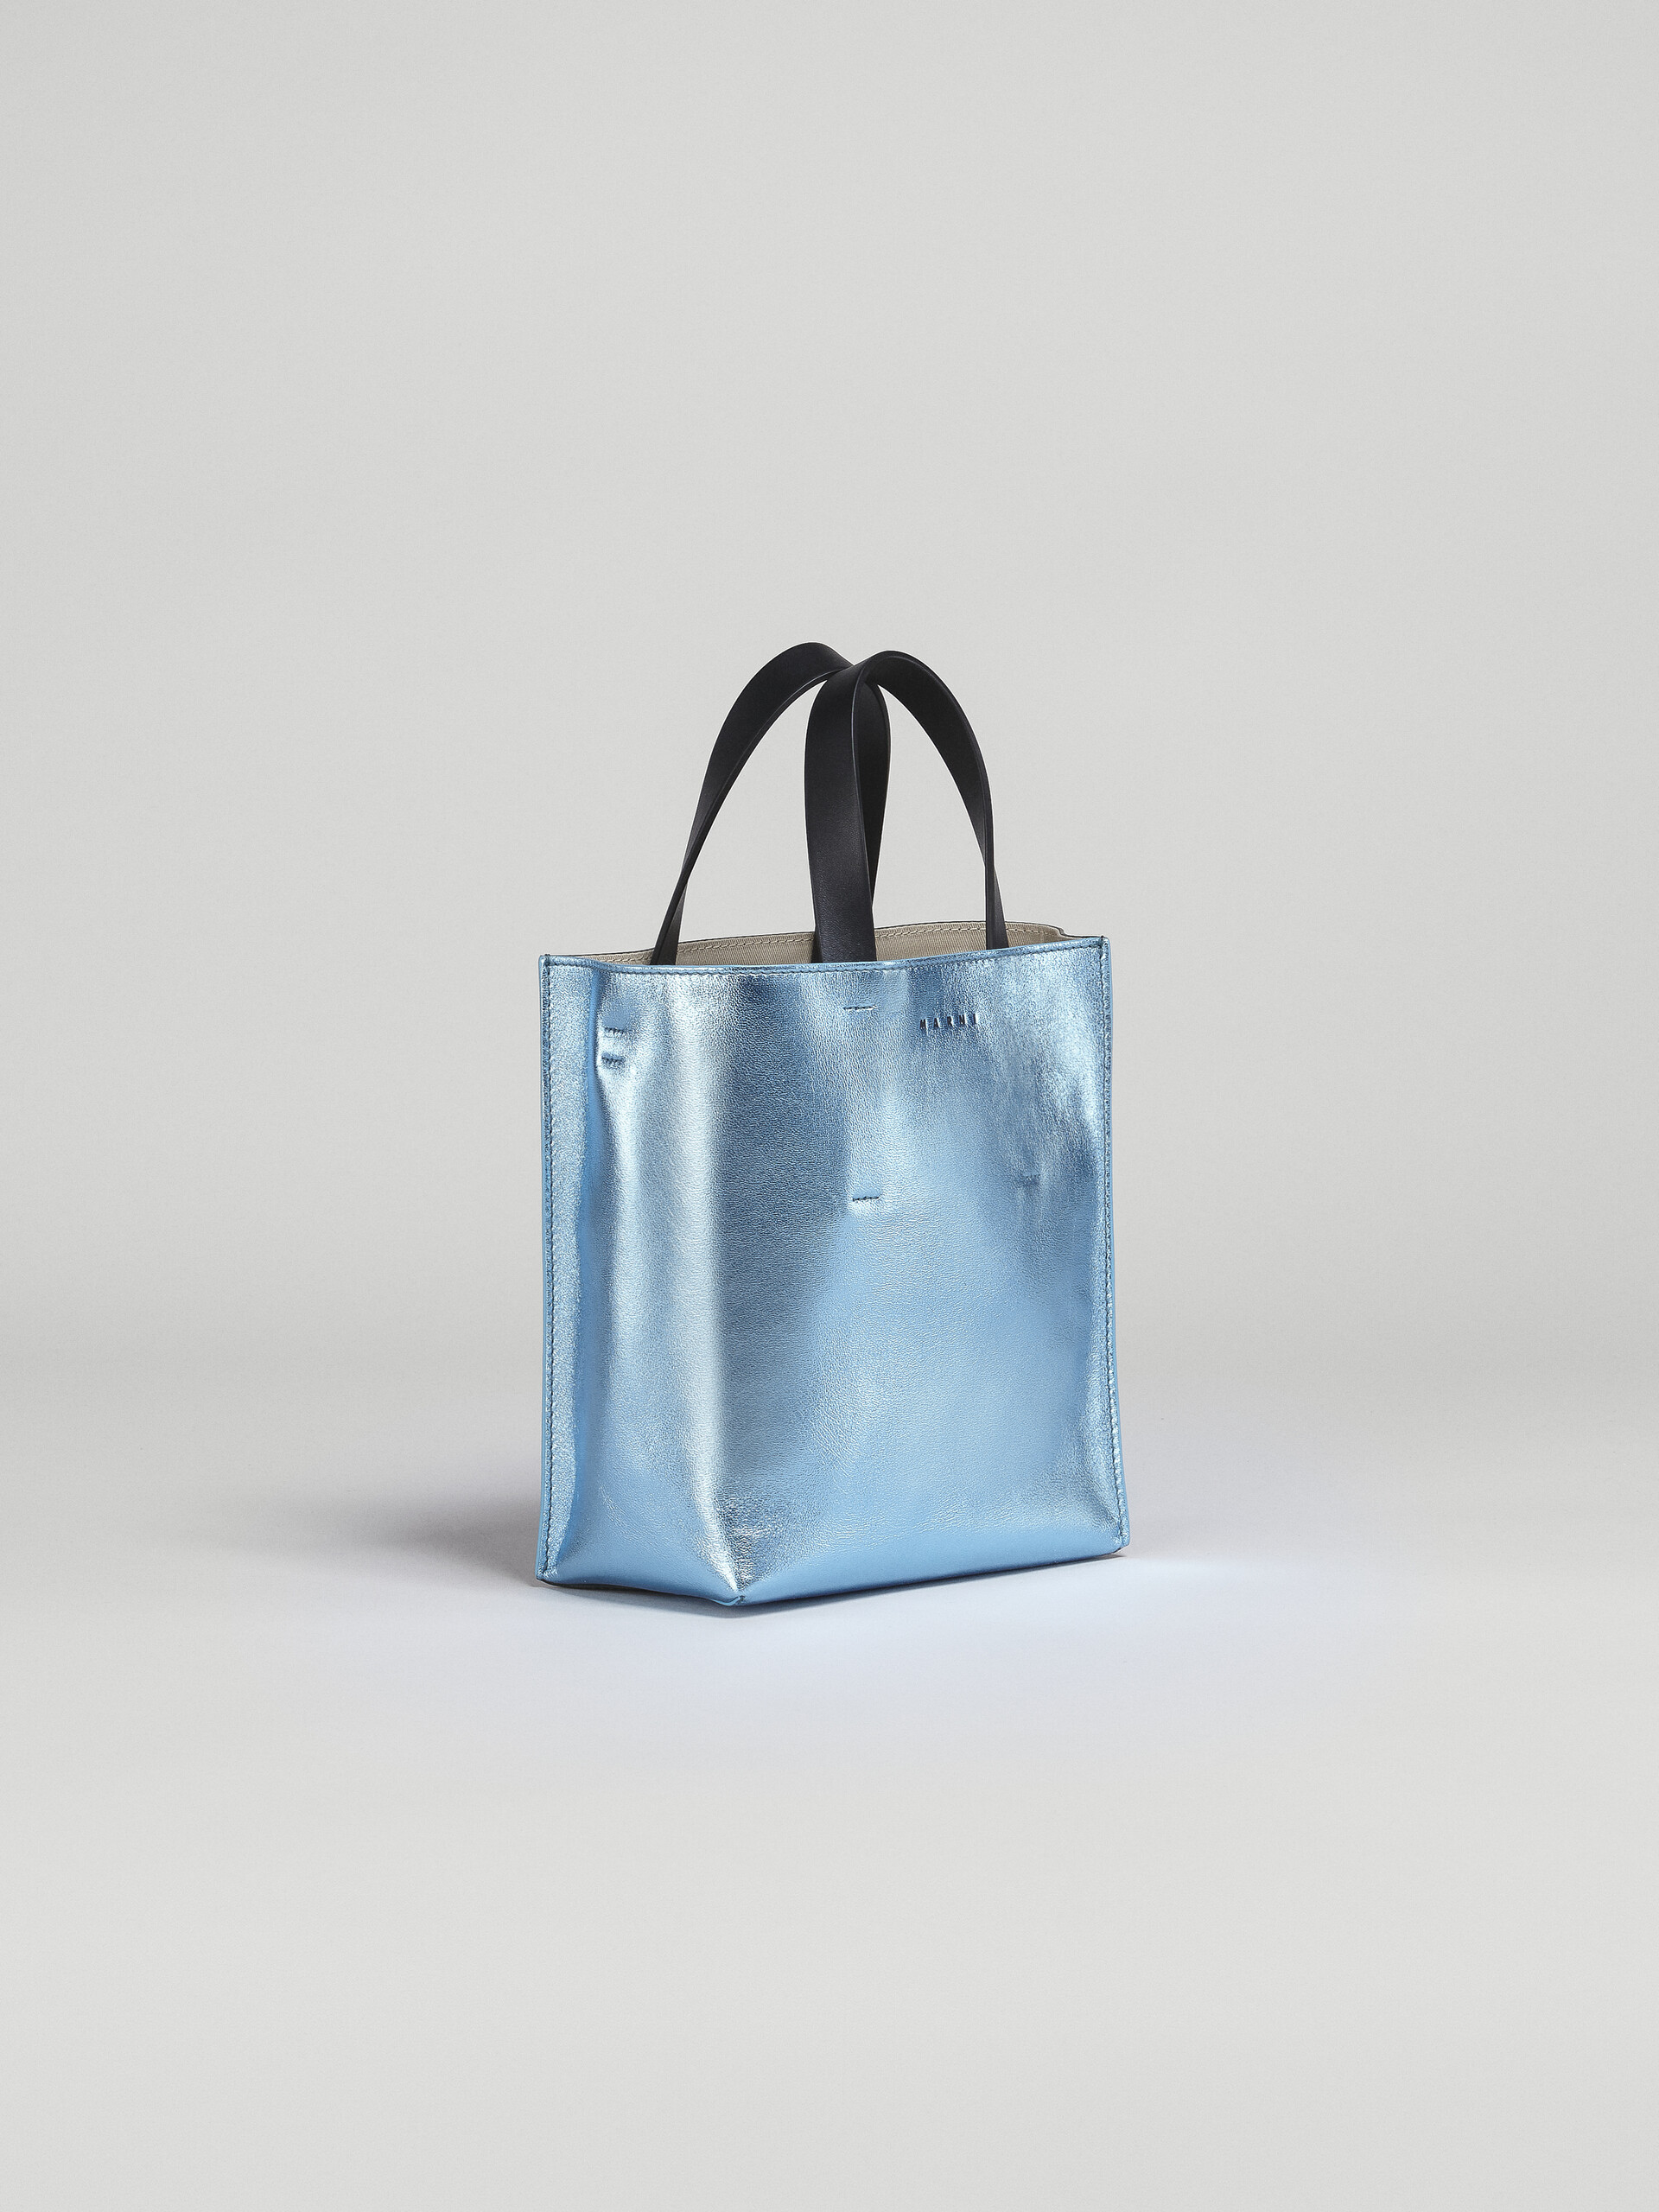 Pale blue green and black metallic leather MUSEO bag - Shopping Bags - Image 4